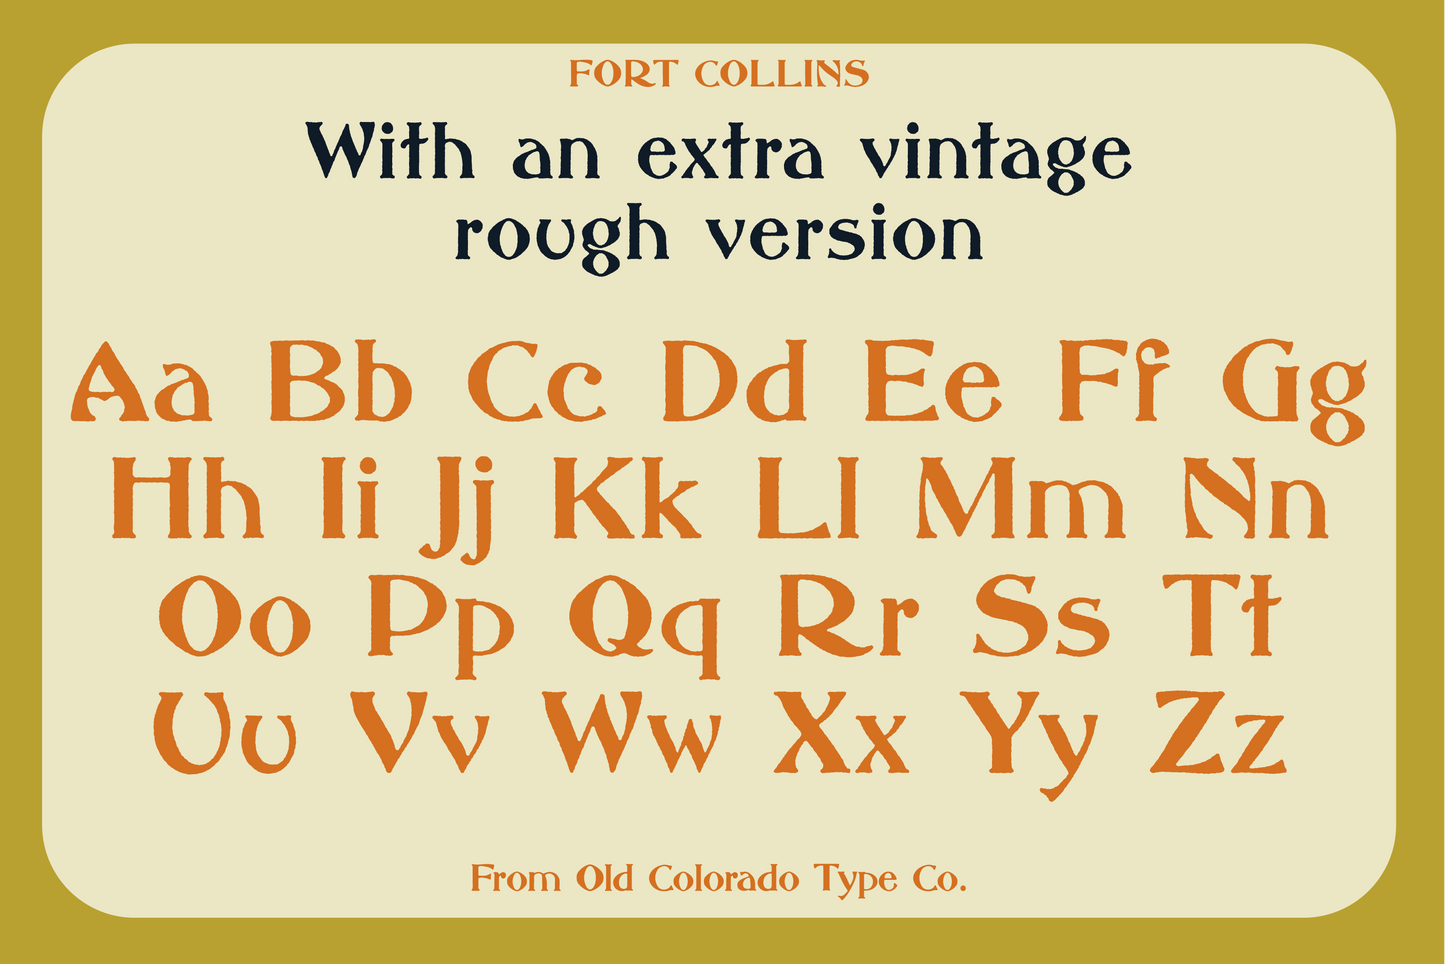 Fort Collins Typeface